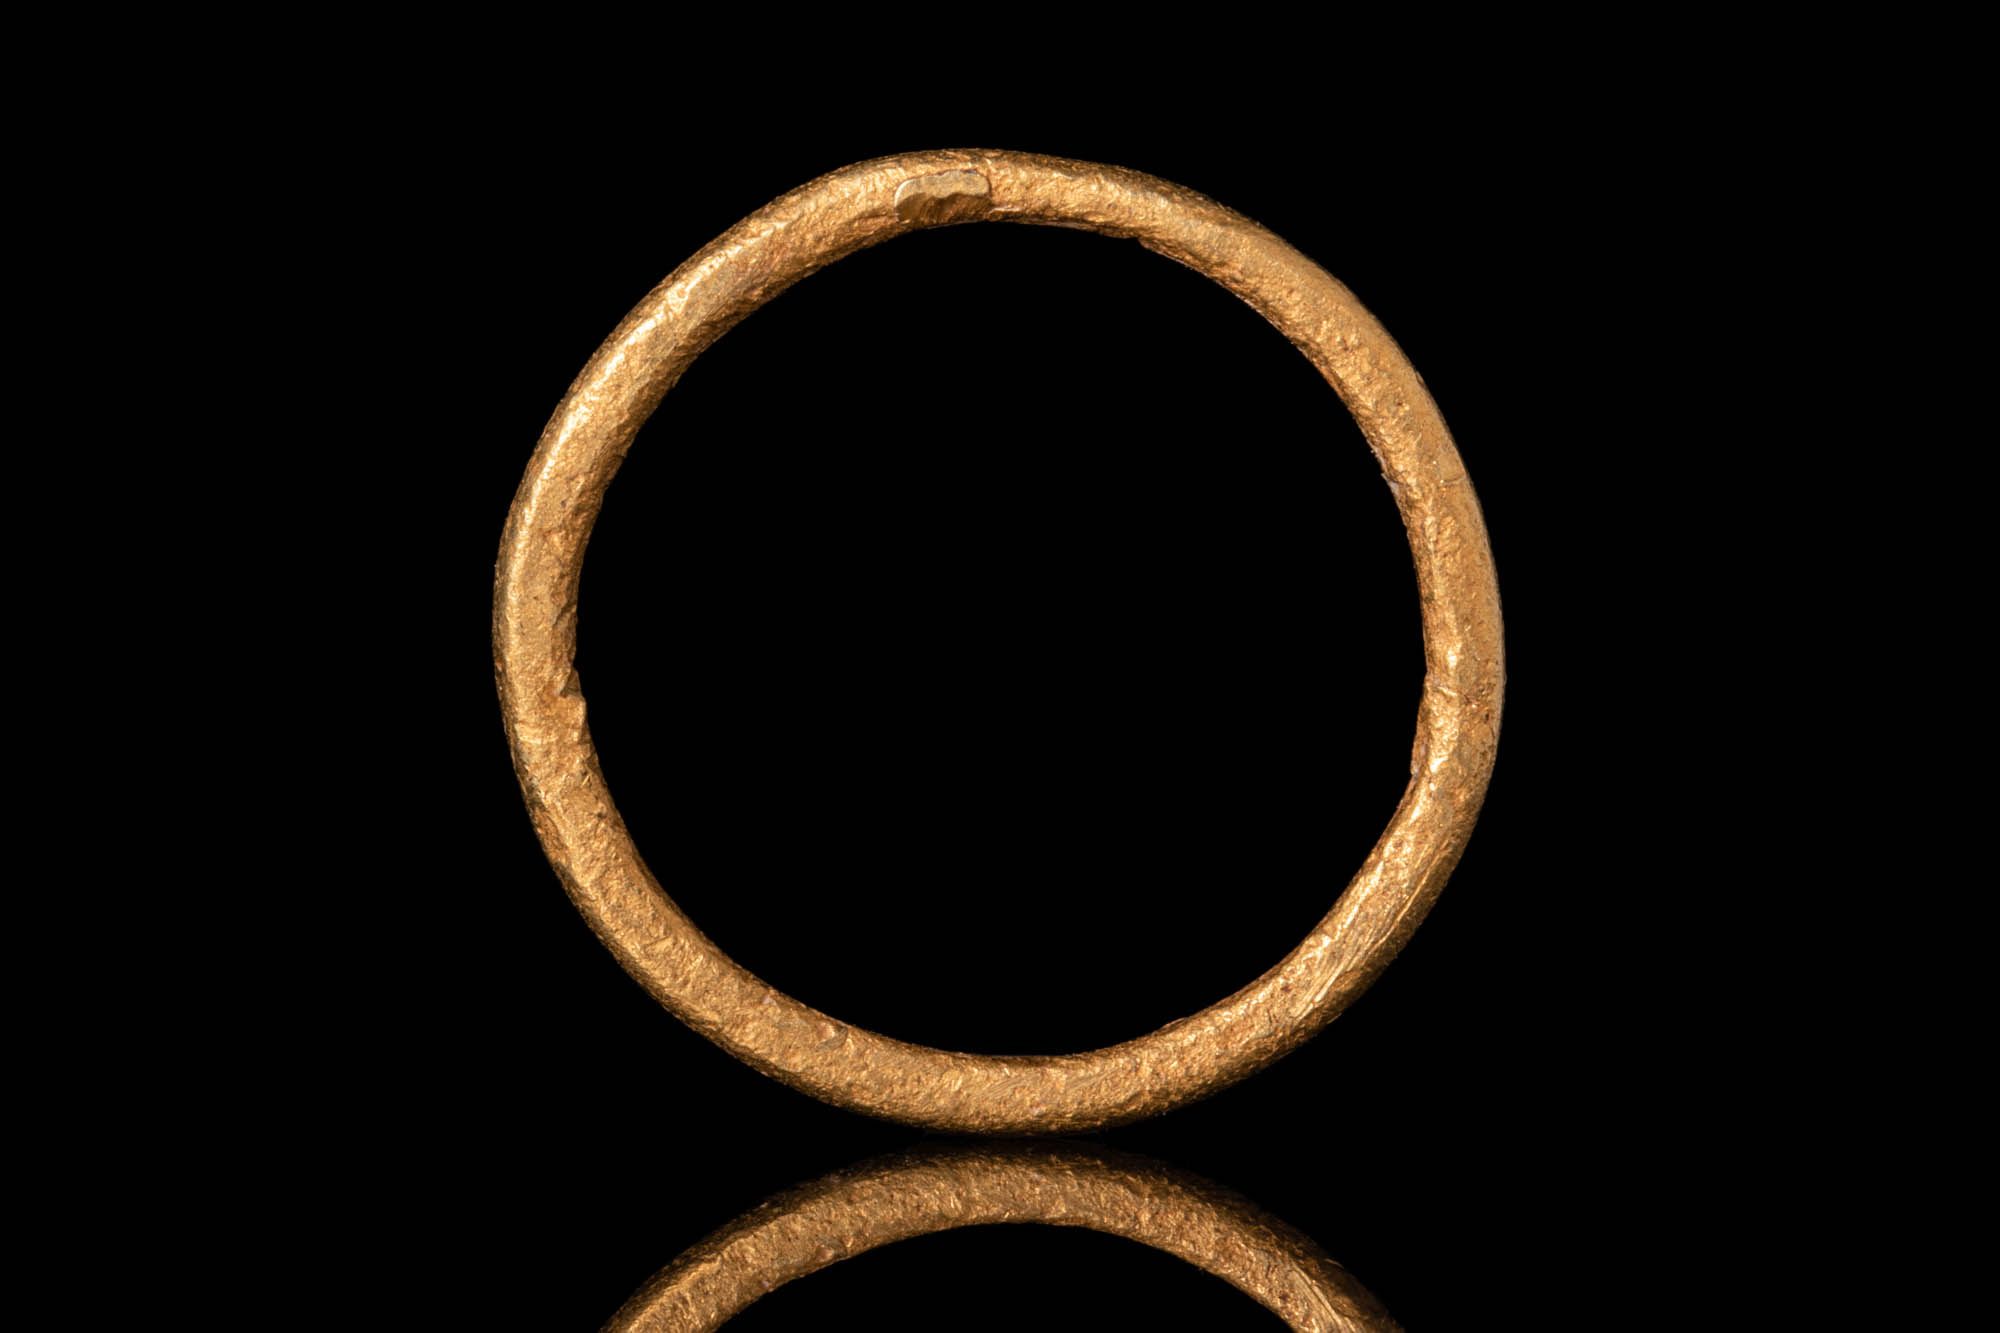 VIKING/SAXON AGE GOLD RING WITH SIMPLE HOOP - Image 4 of 4